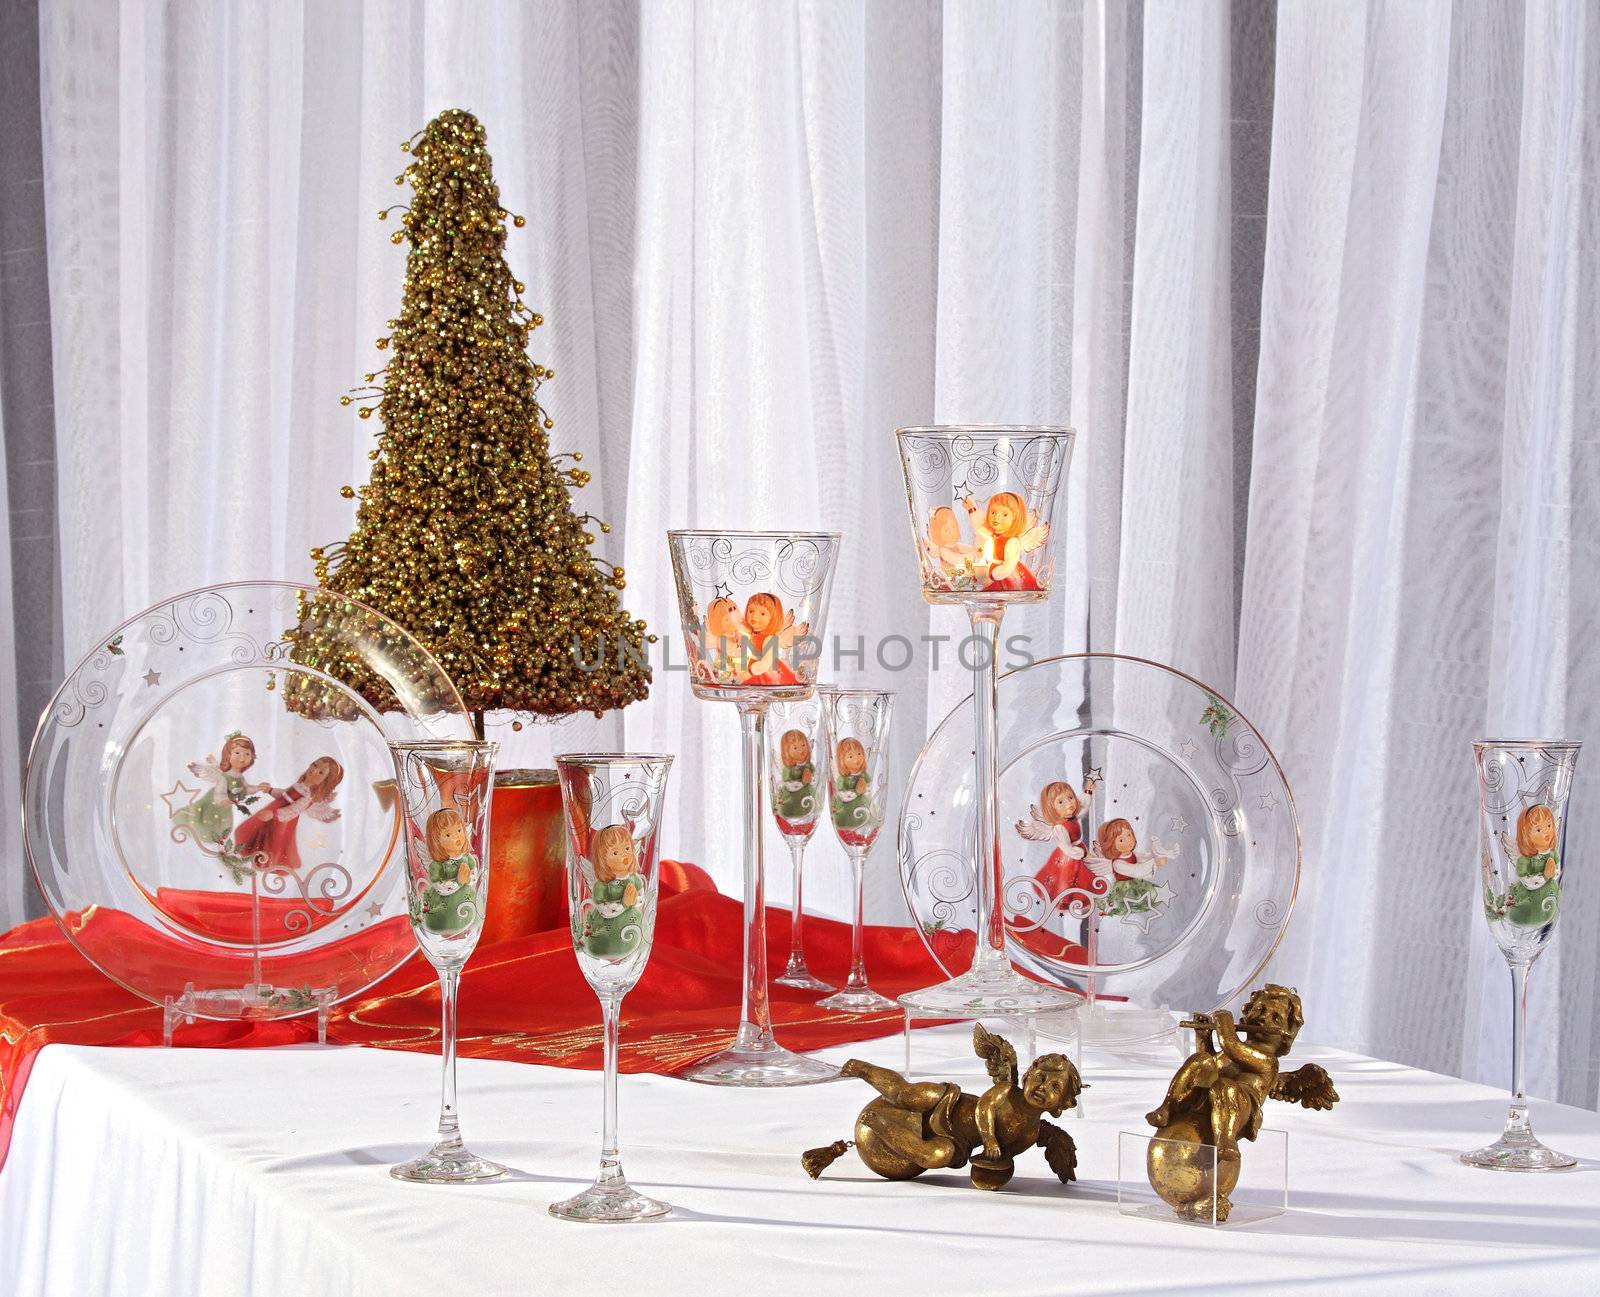 The Christmas still life consisting of glass glasses, plates, candlesticks, bronze angels and decorative fur-tree.